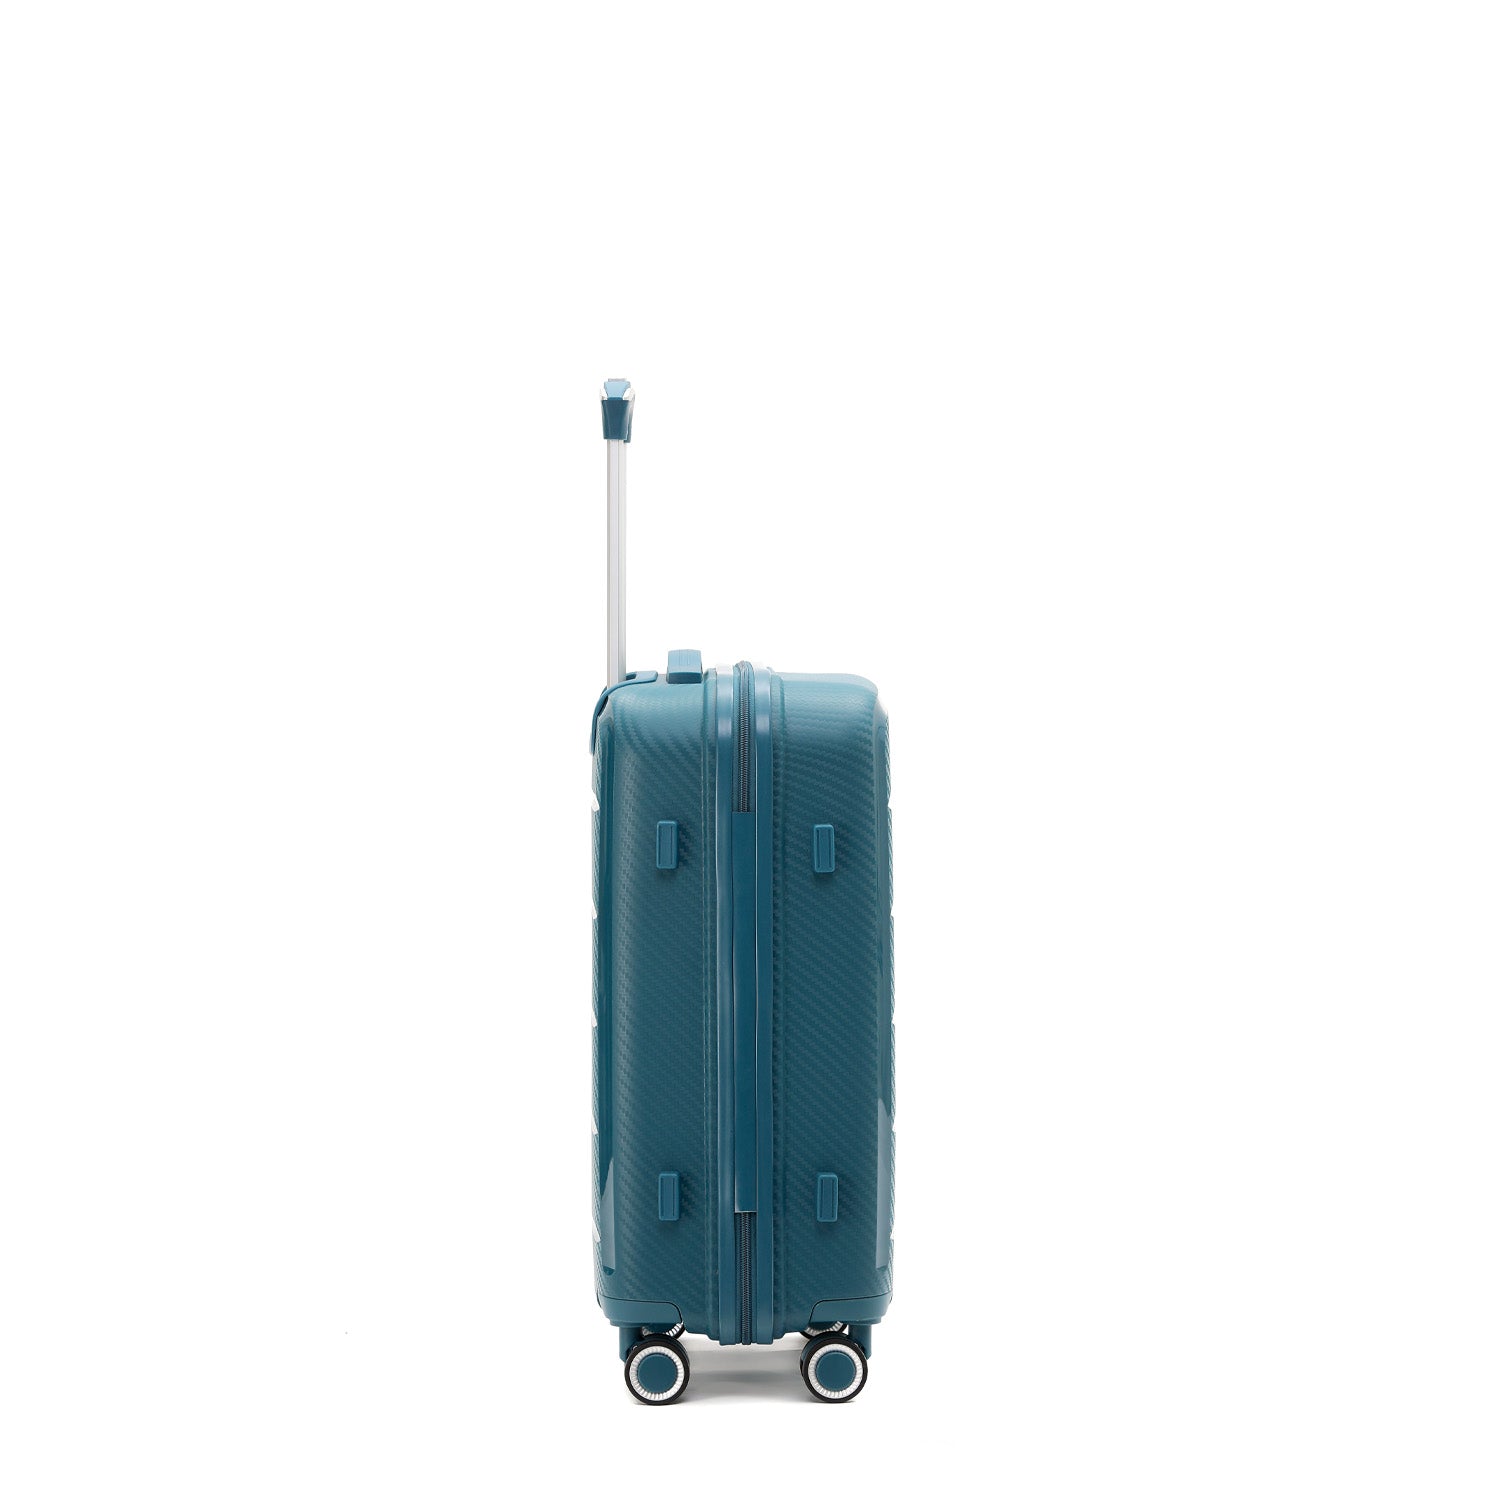 Paklite - PA7350 small spinner suitcase - Blue-4